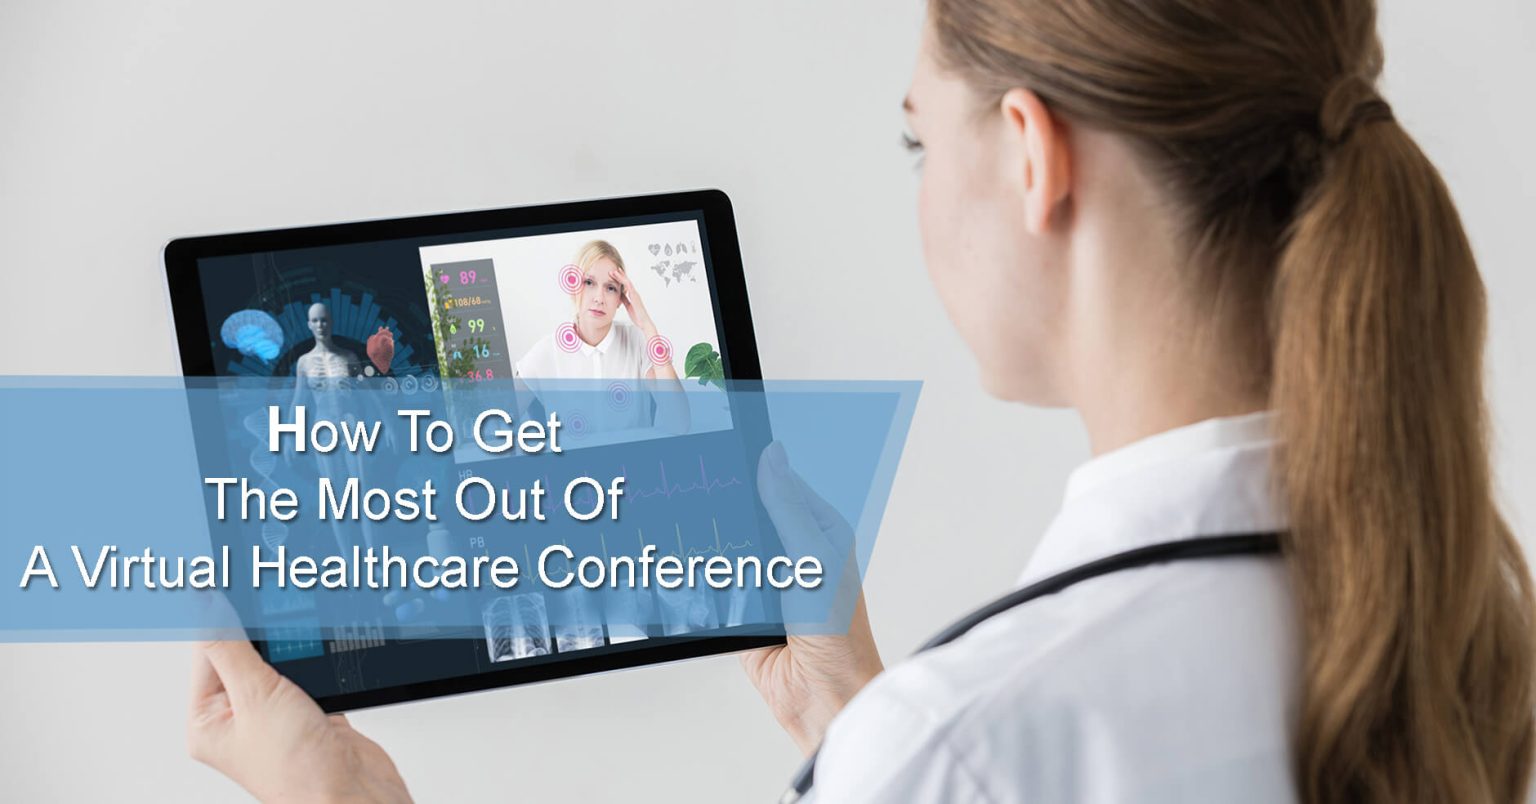 How To Get The Most Out Of A Virtual Healthcare Conference